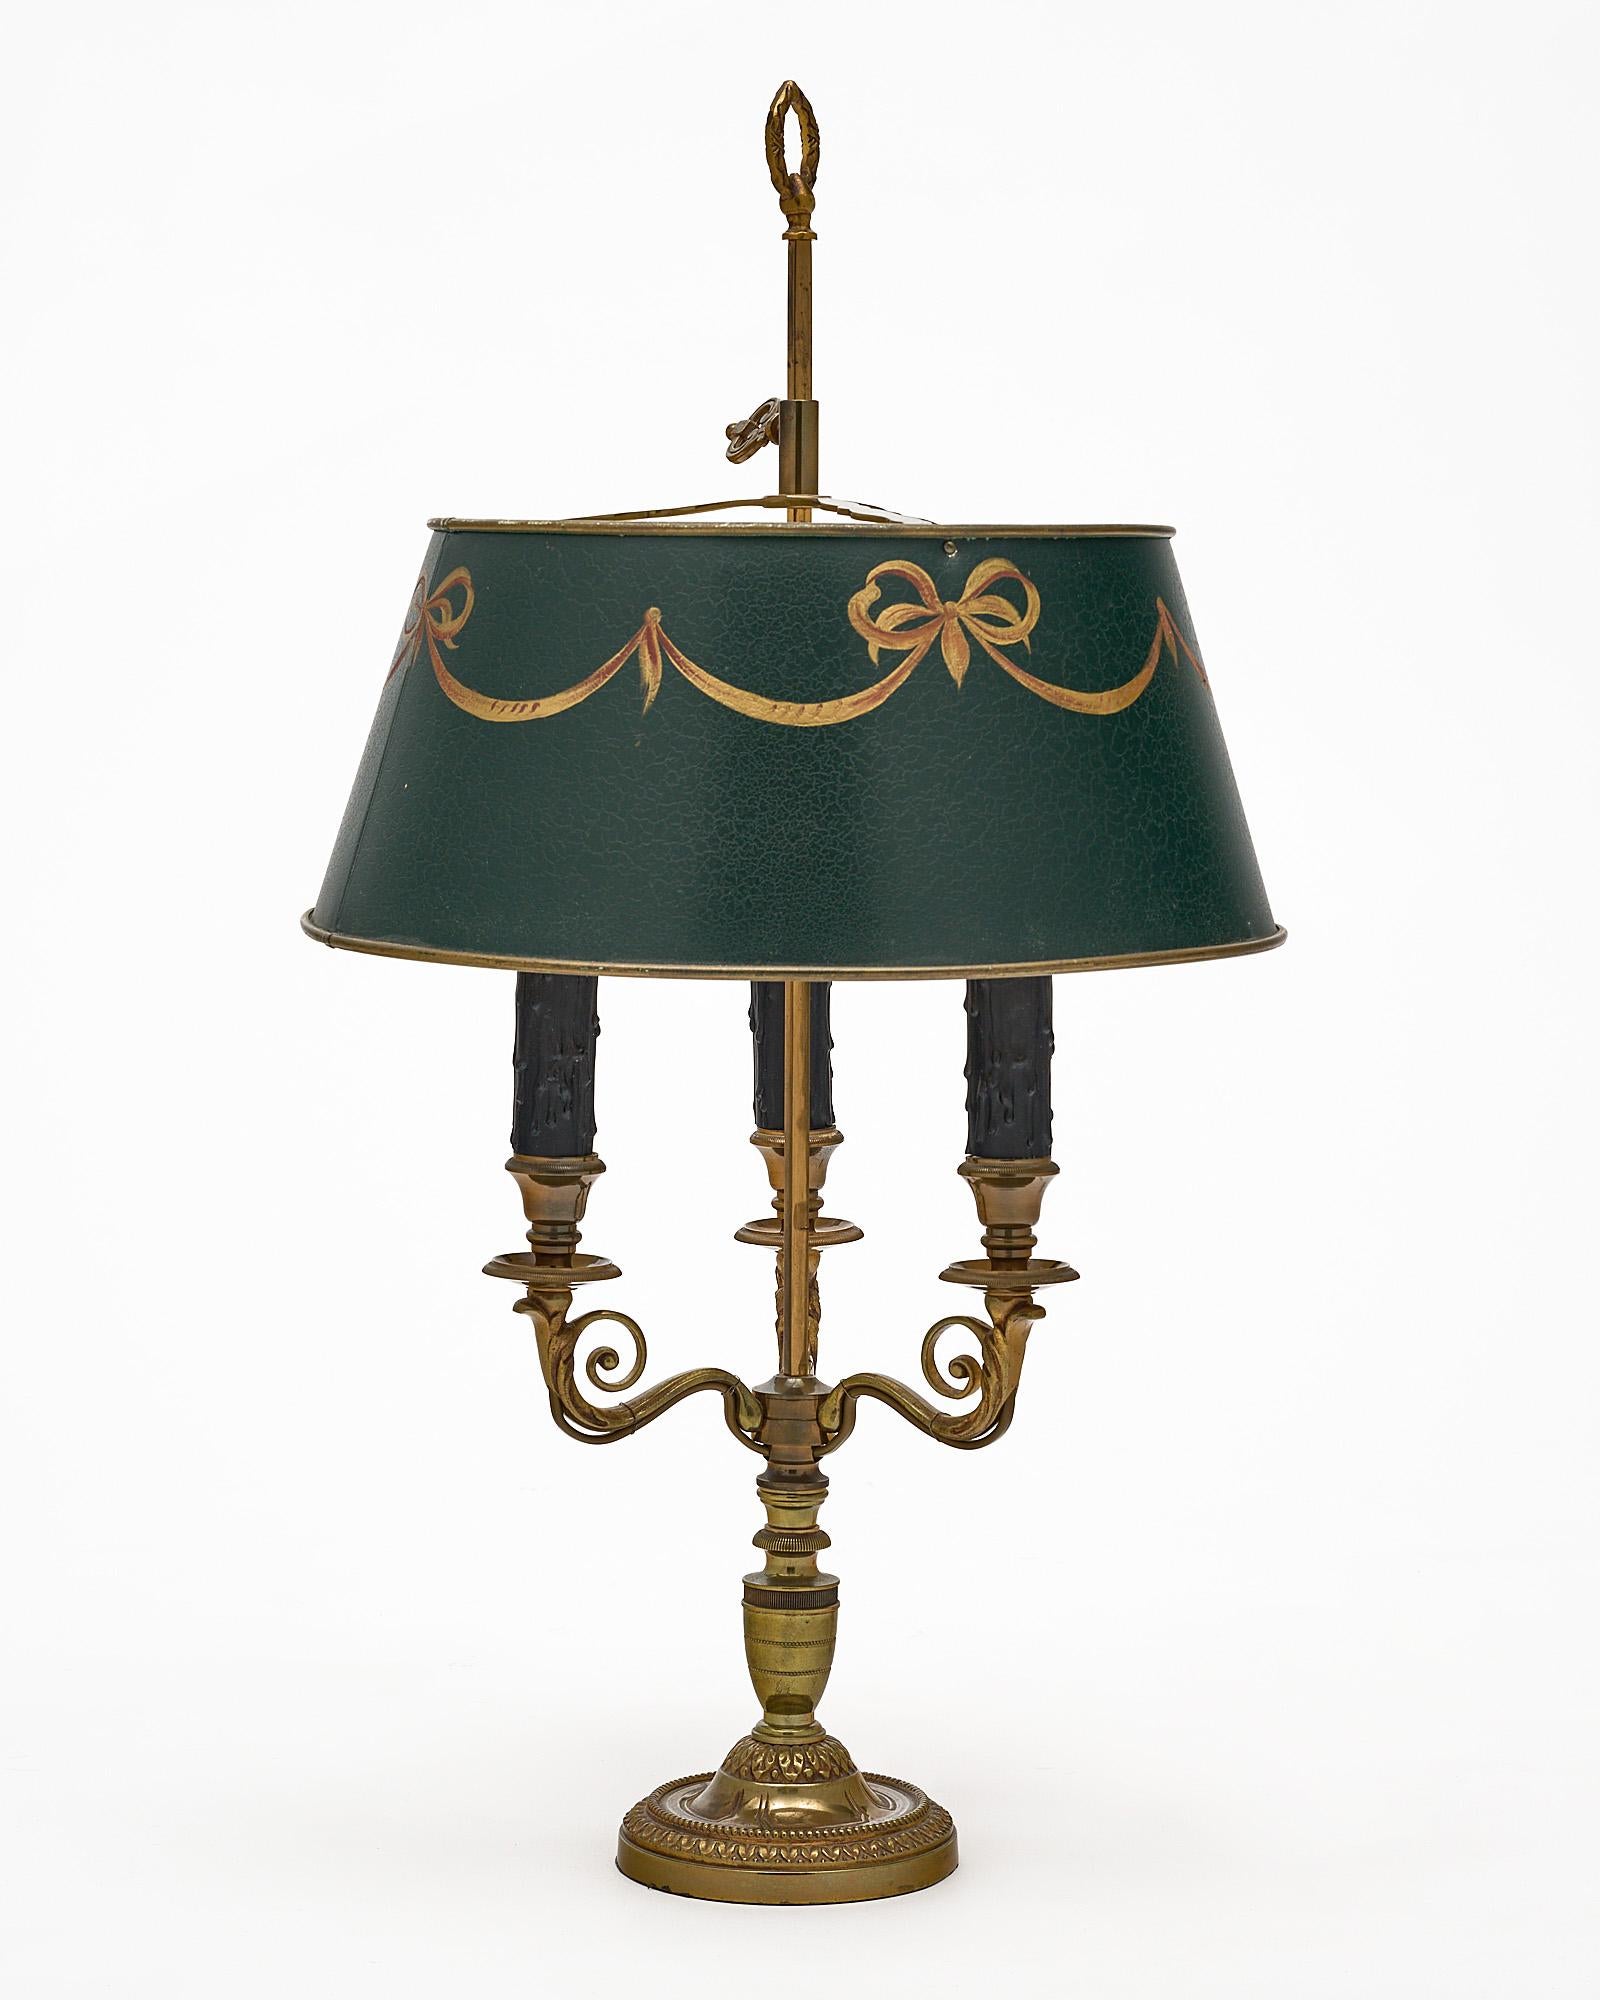 Bouillotte lamp; French; in the French Empire style. This piece has a base made of finely cast bronze featuring three arms. There is a beautiful hand painted and gold leafed adjustable green shade. It has been newly wired to fit US standards. The